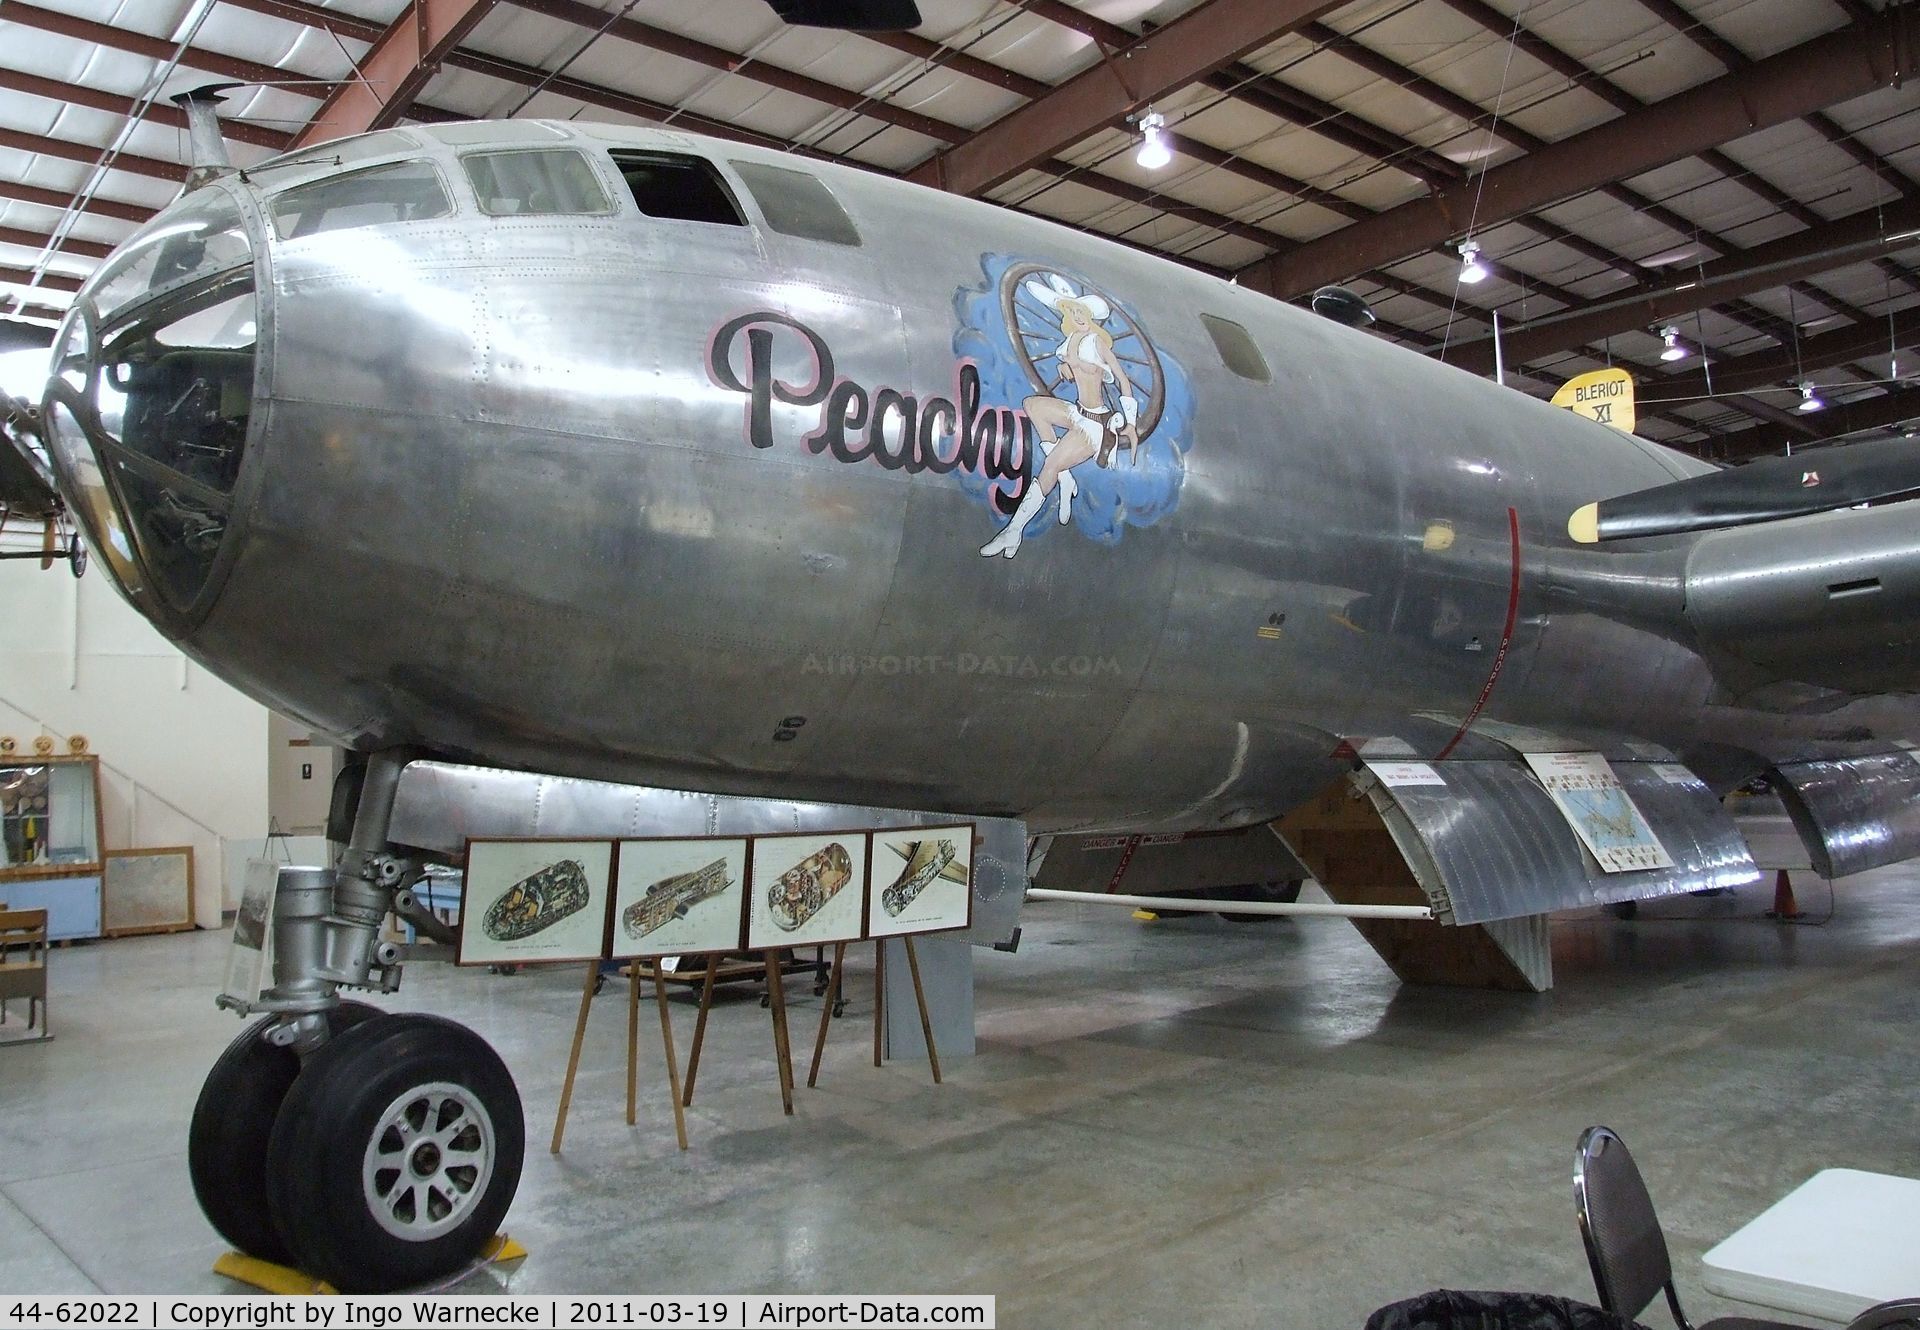 44-62022, Boeing B-29 Superfortess C/N 11499, Boeing B-29A Superfortress at the Pueblo Weisbrod Aircraft Museum, Pueblo CO